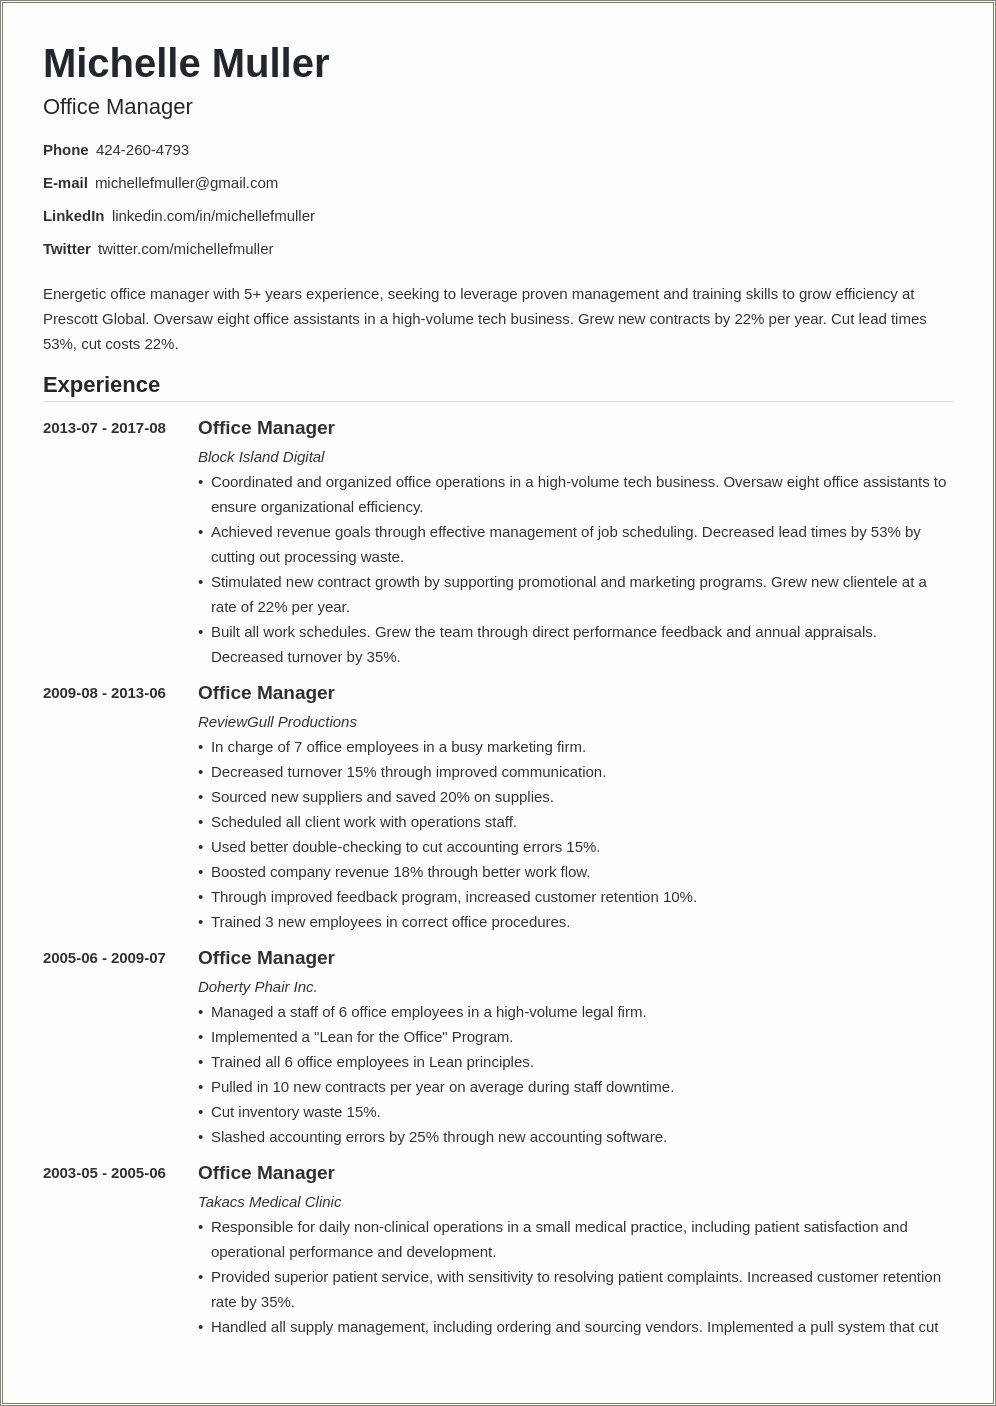 Can I Remove Old Experience From My Resume